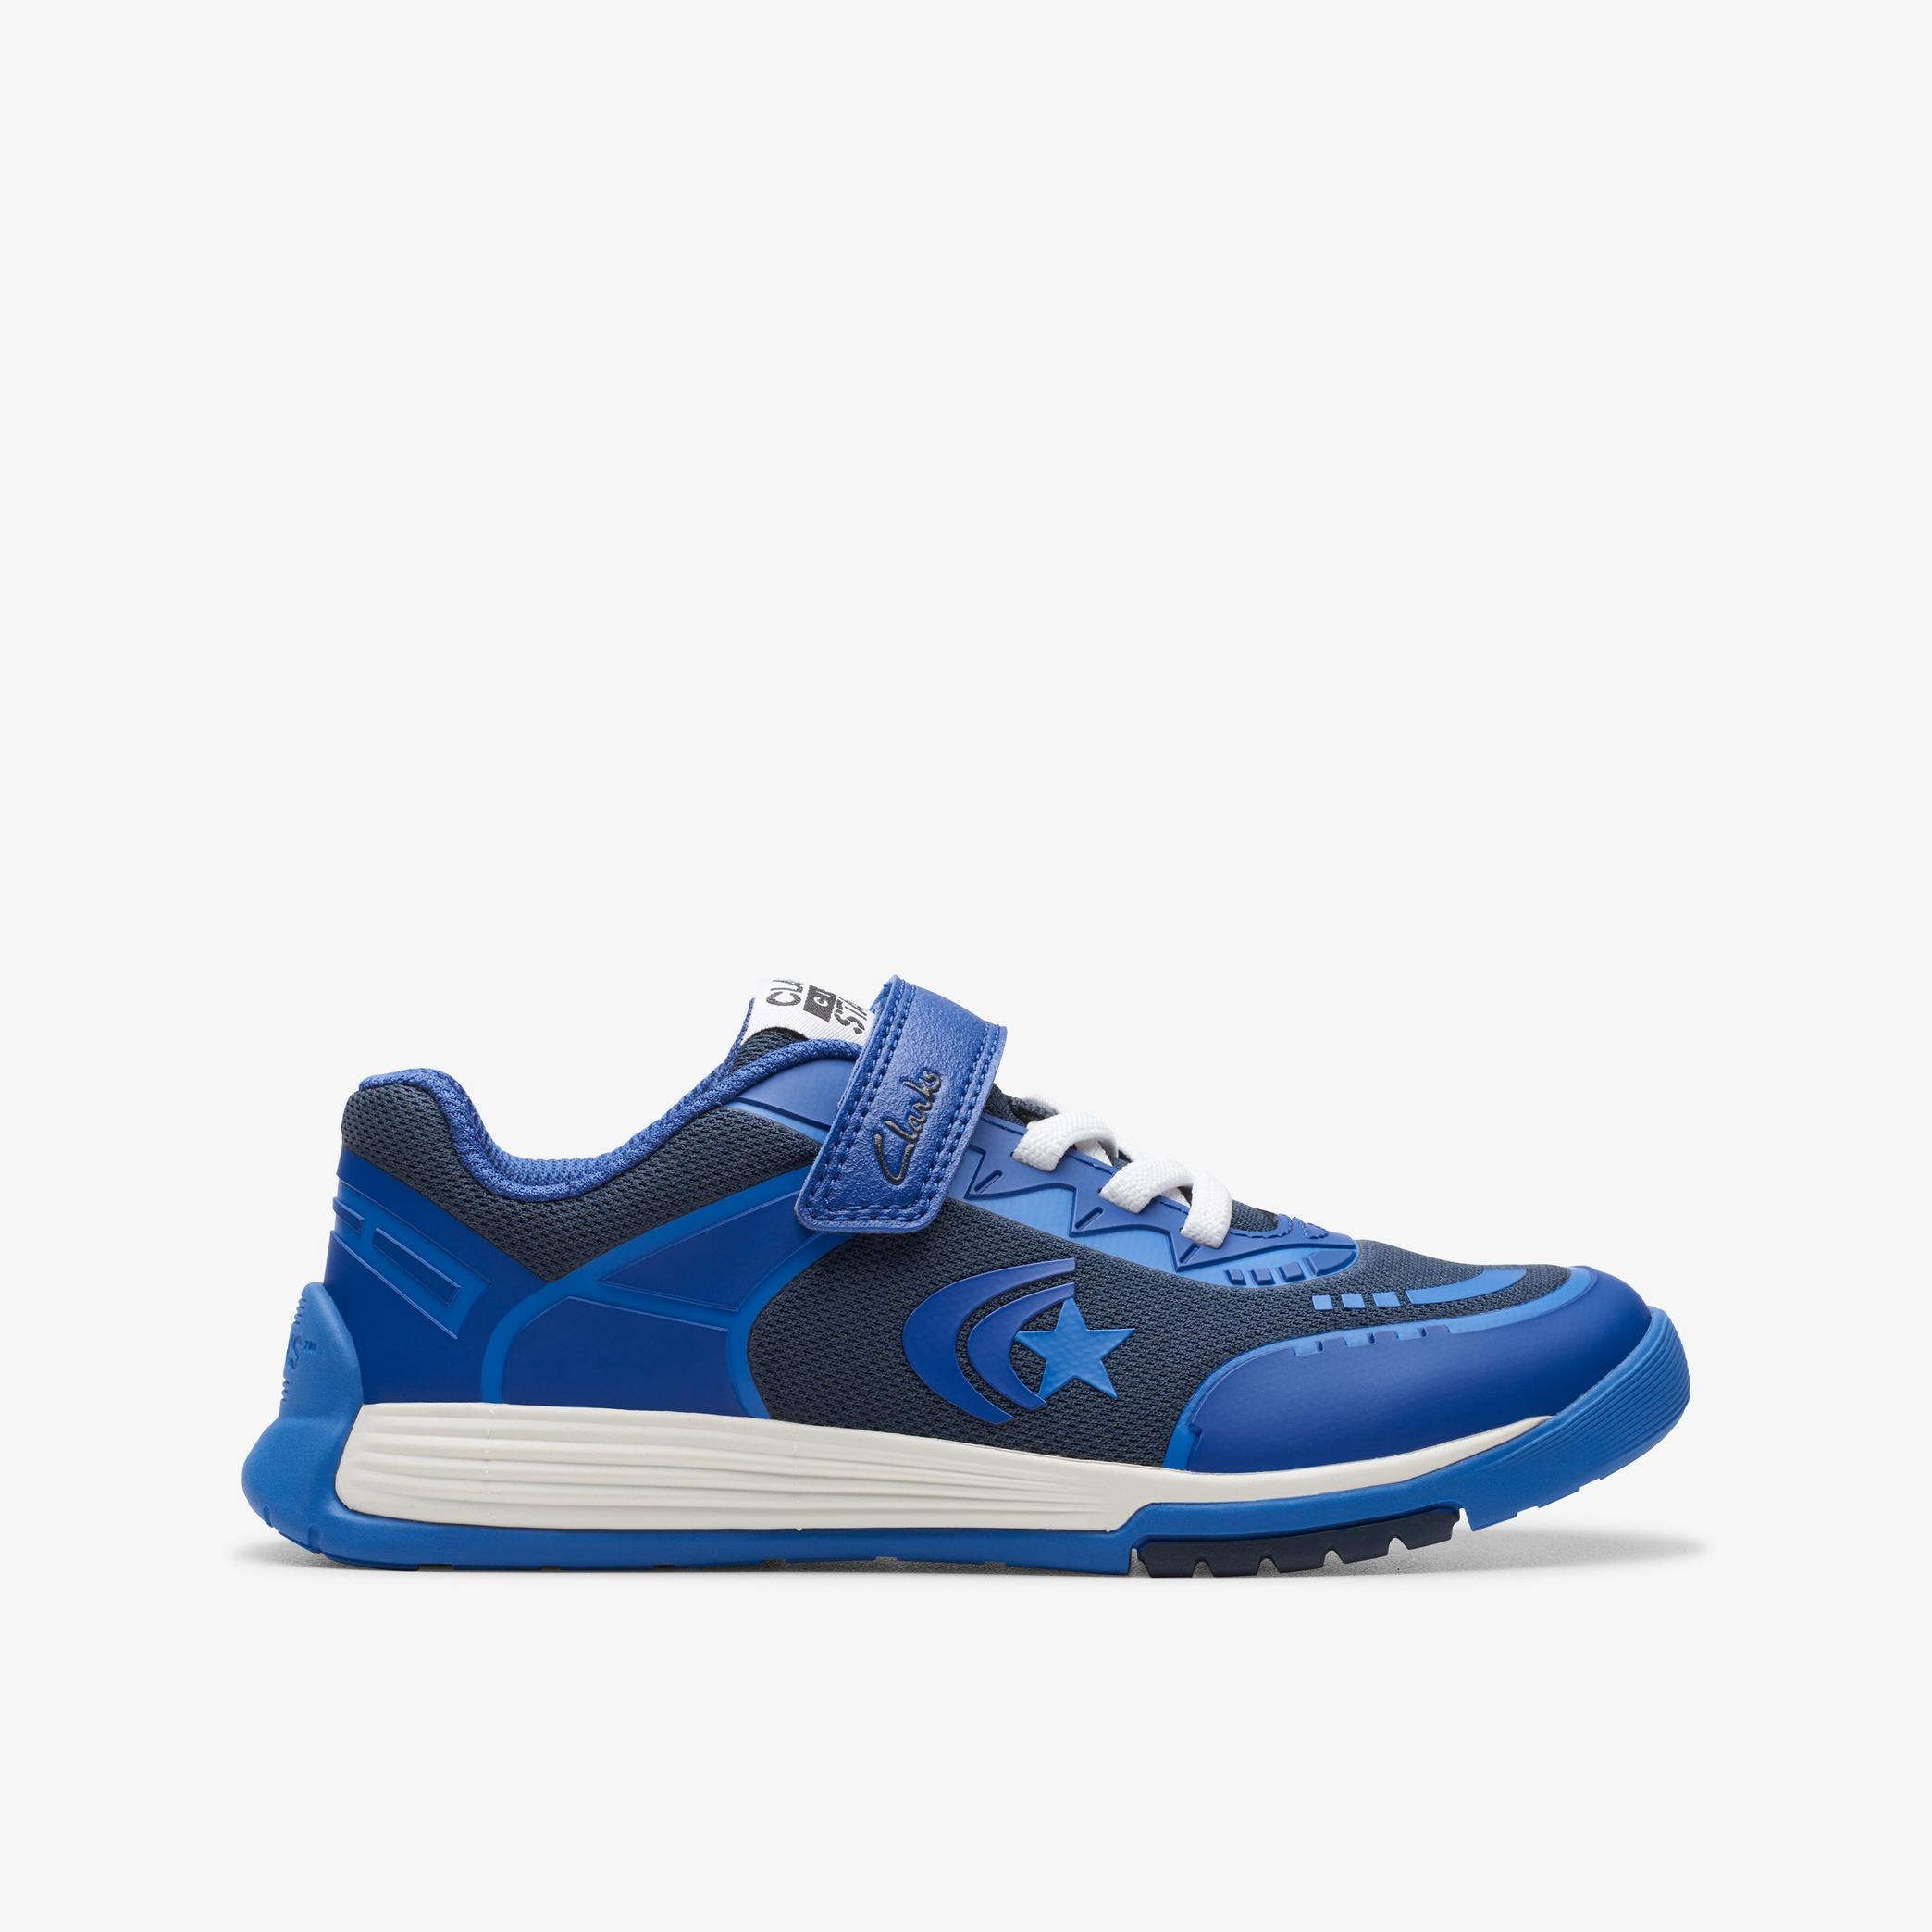 CICA Star Flex Kid Blue Combination Trainers, view 1 of 7